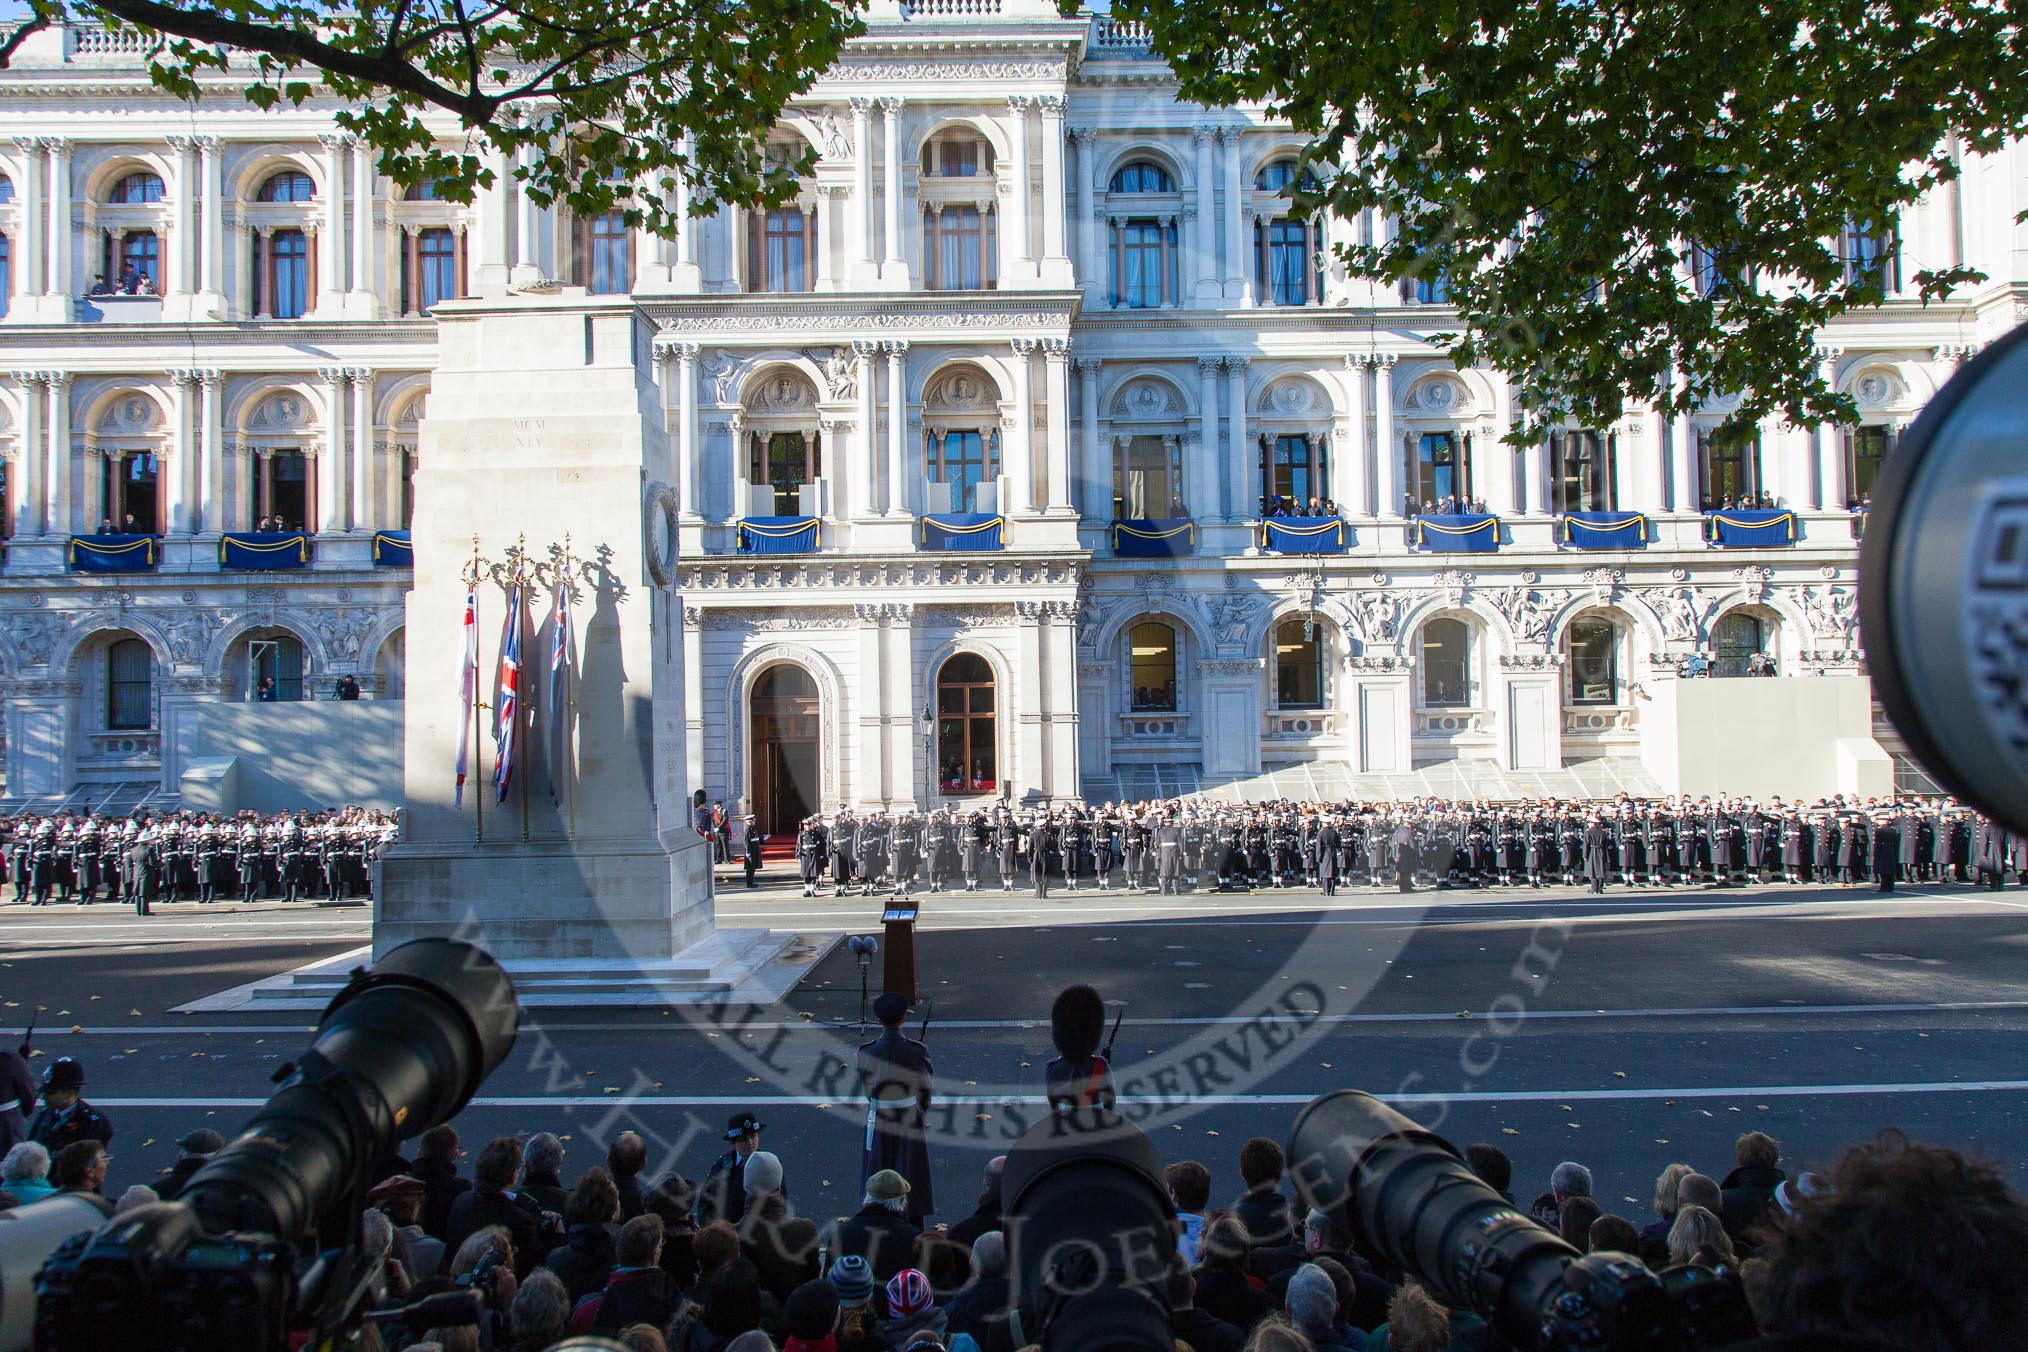 Whitehall shortly before the start of the Cenotaph Ceremony.